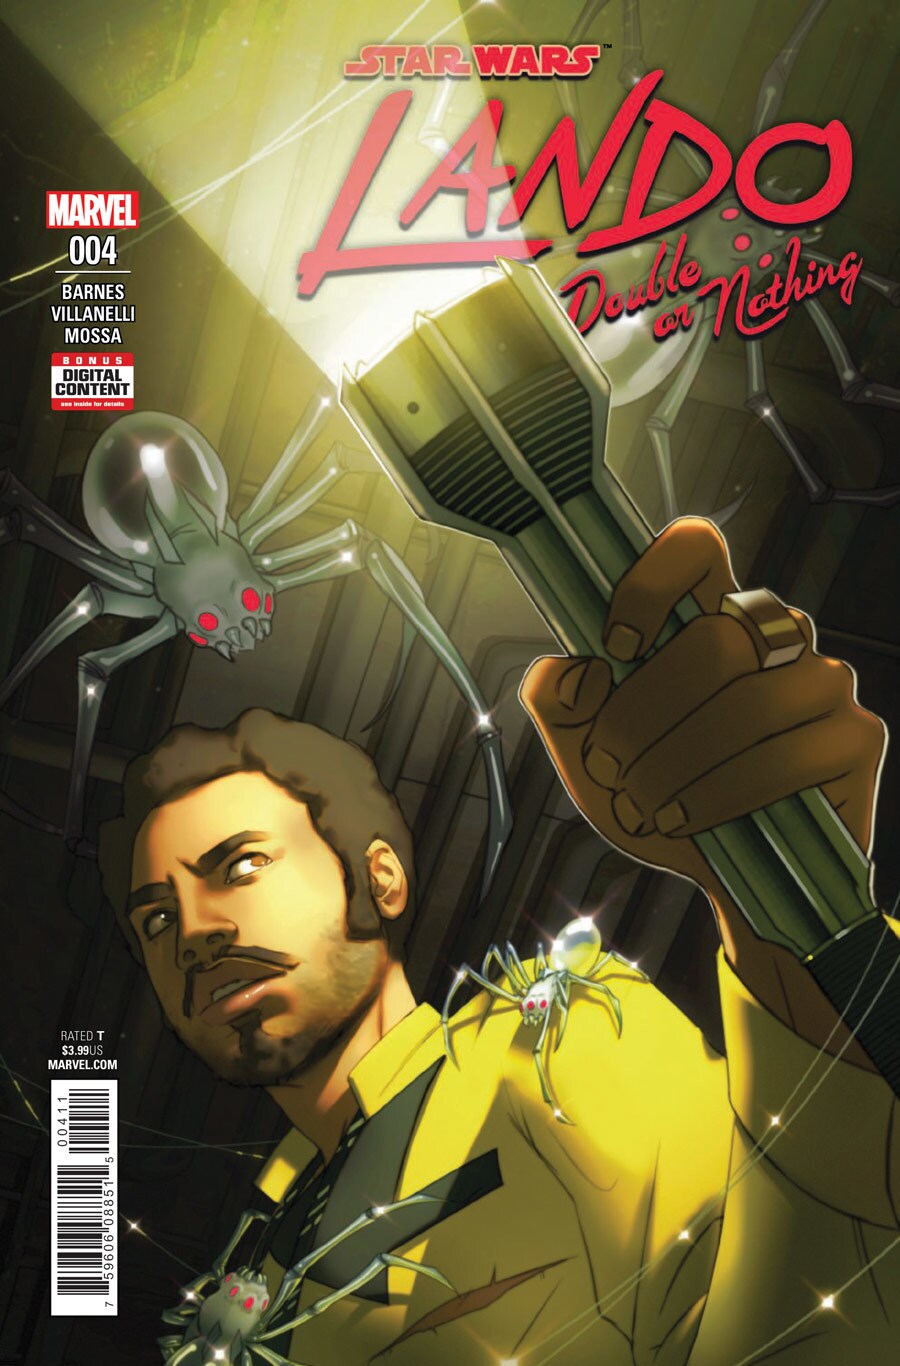 Lando holds a flashlight as spiders crawl over him on the cover of the fourth issue of the Star Wars Lando Double or Nothing comic book.